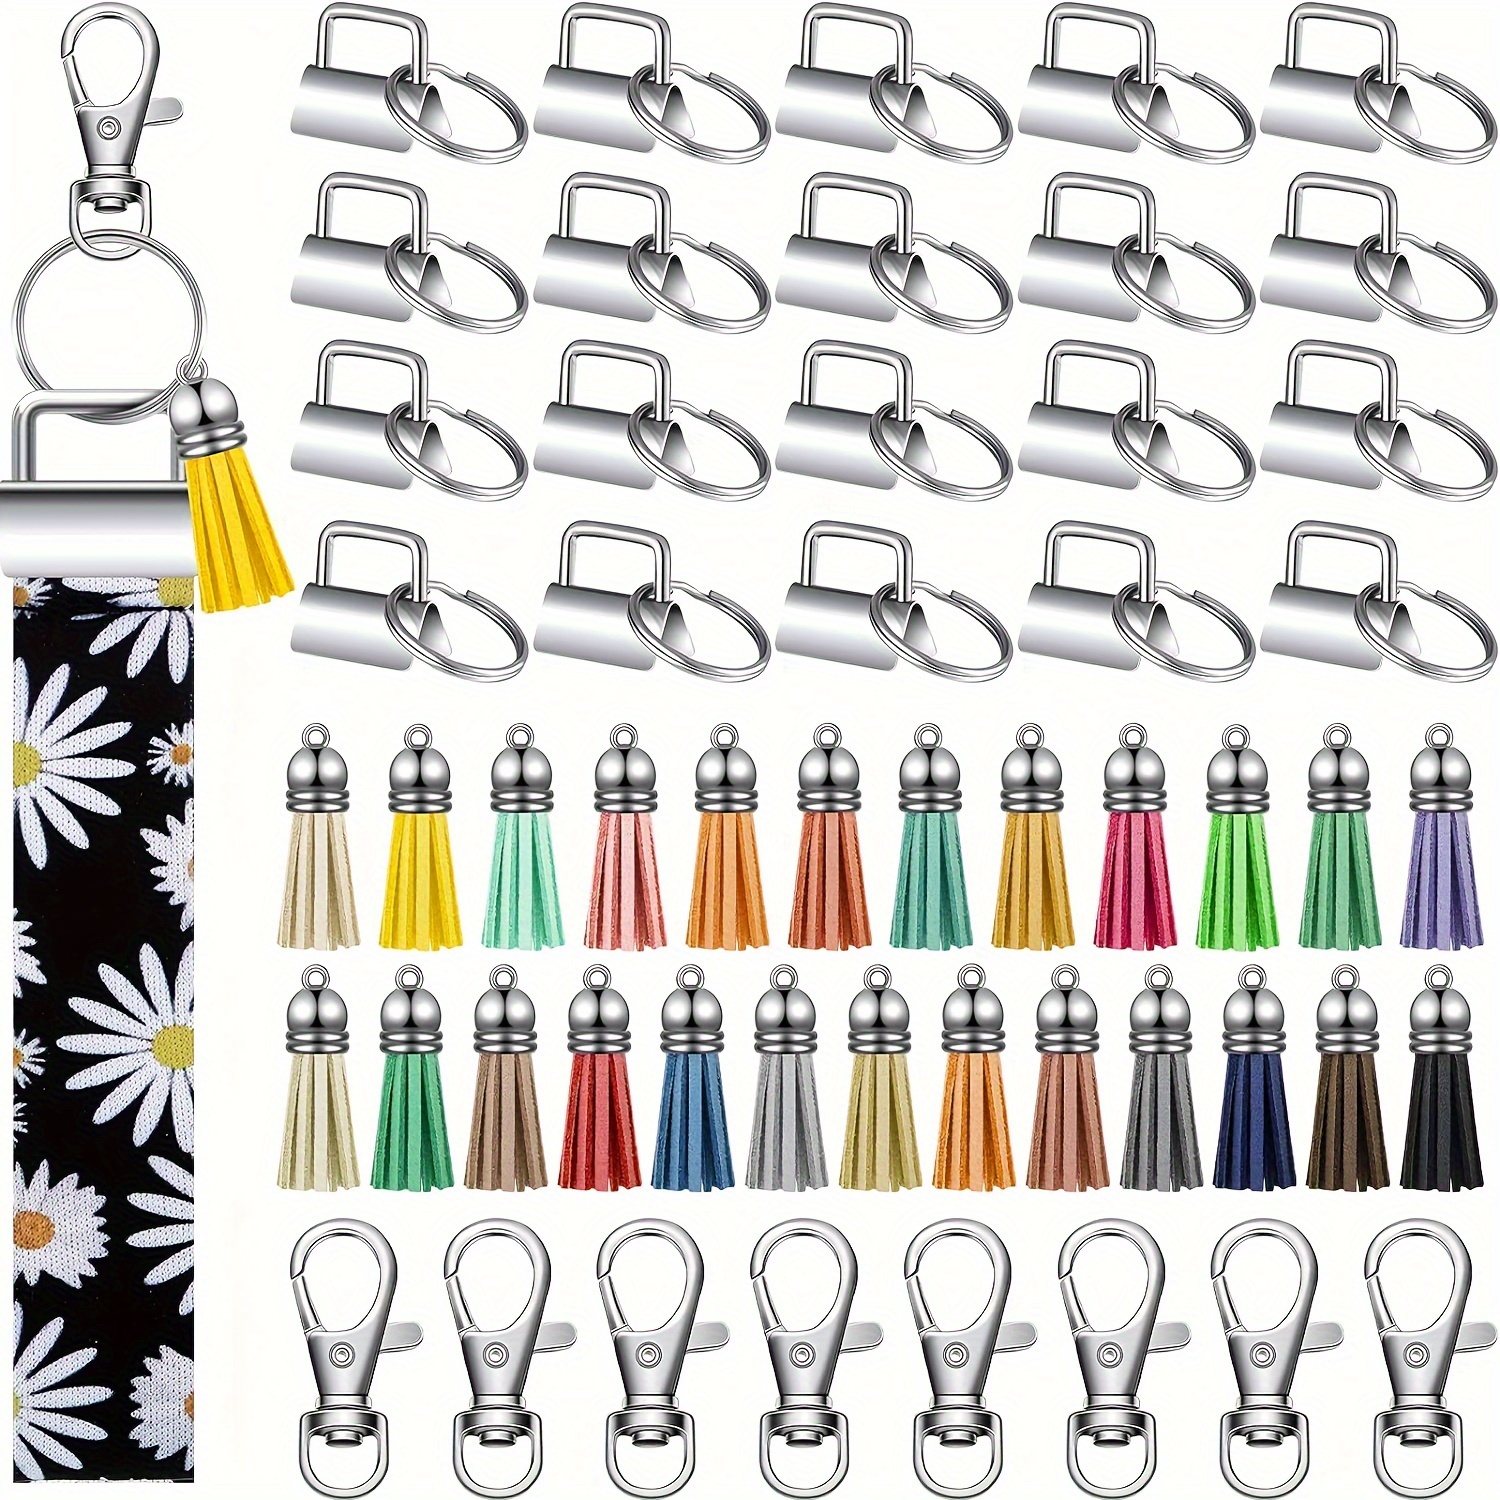 

45pcs Metal Wristlet Keychain Kit, Swivel Lobster Claw Clasps With D-ring, Elegant Diy Key Fob Hardware Set With Colorful Leather Tassels For Lanyard, Crafts Keychains